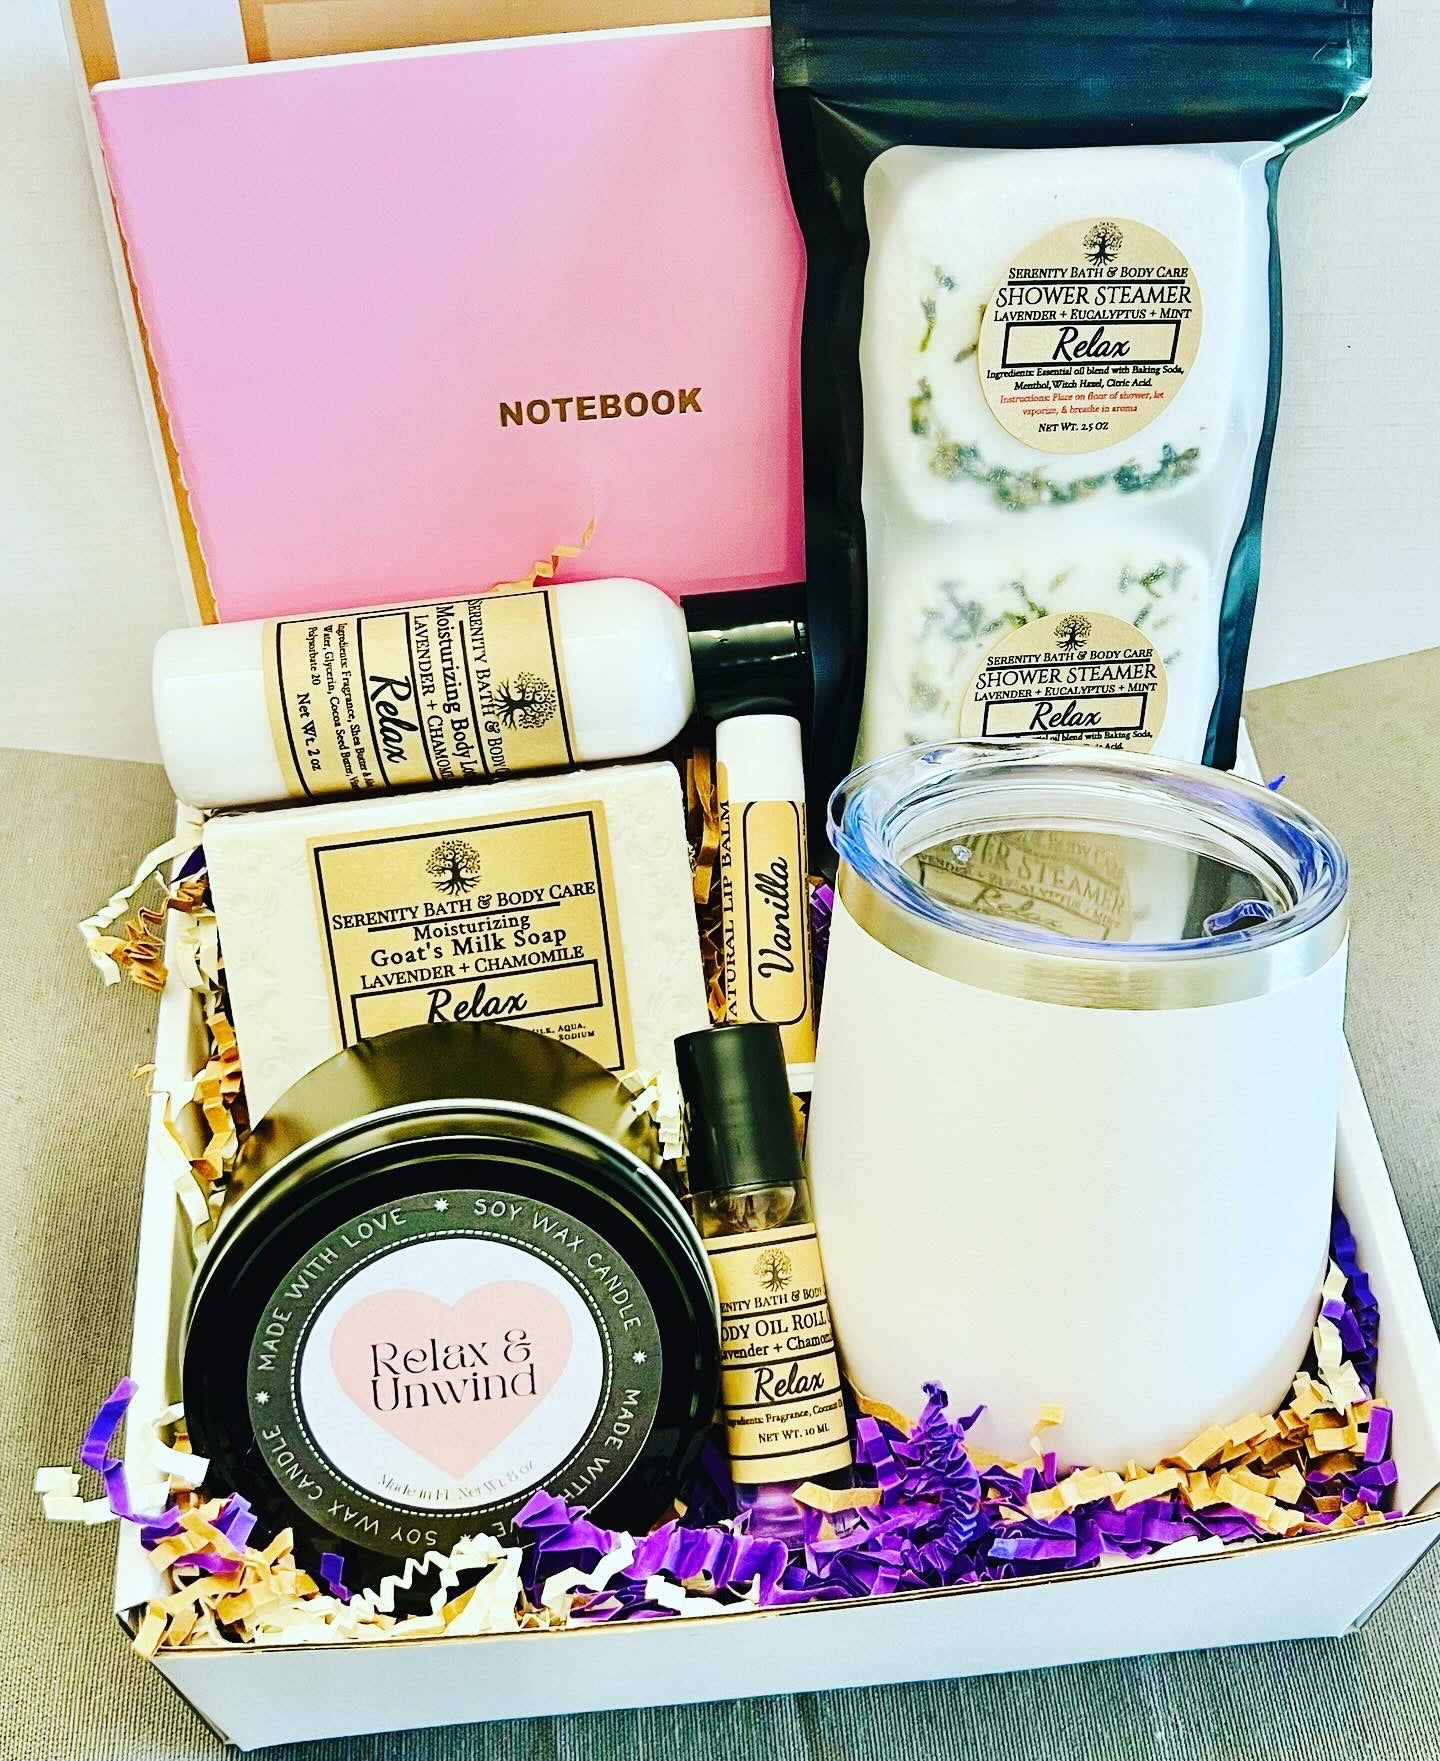 A Gift for Her| Bath and Body Spa Gift Set| Relax and Unwind Gift Basket| Best Mom Ever| Thank You Gift| Self Care Gift Box for Women| You Got This Gift| Congrats Gifts| Birthday Gifts for Her